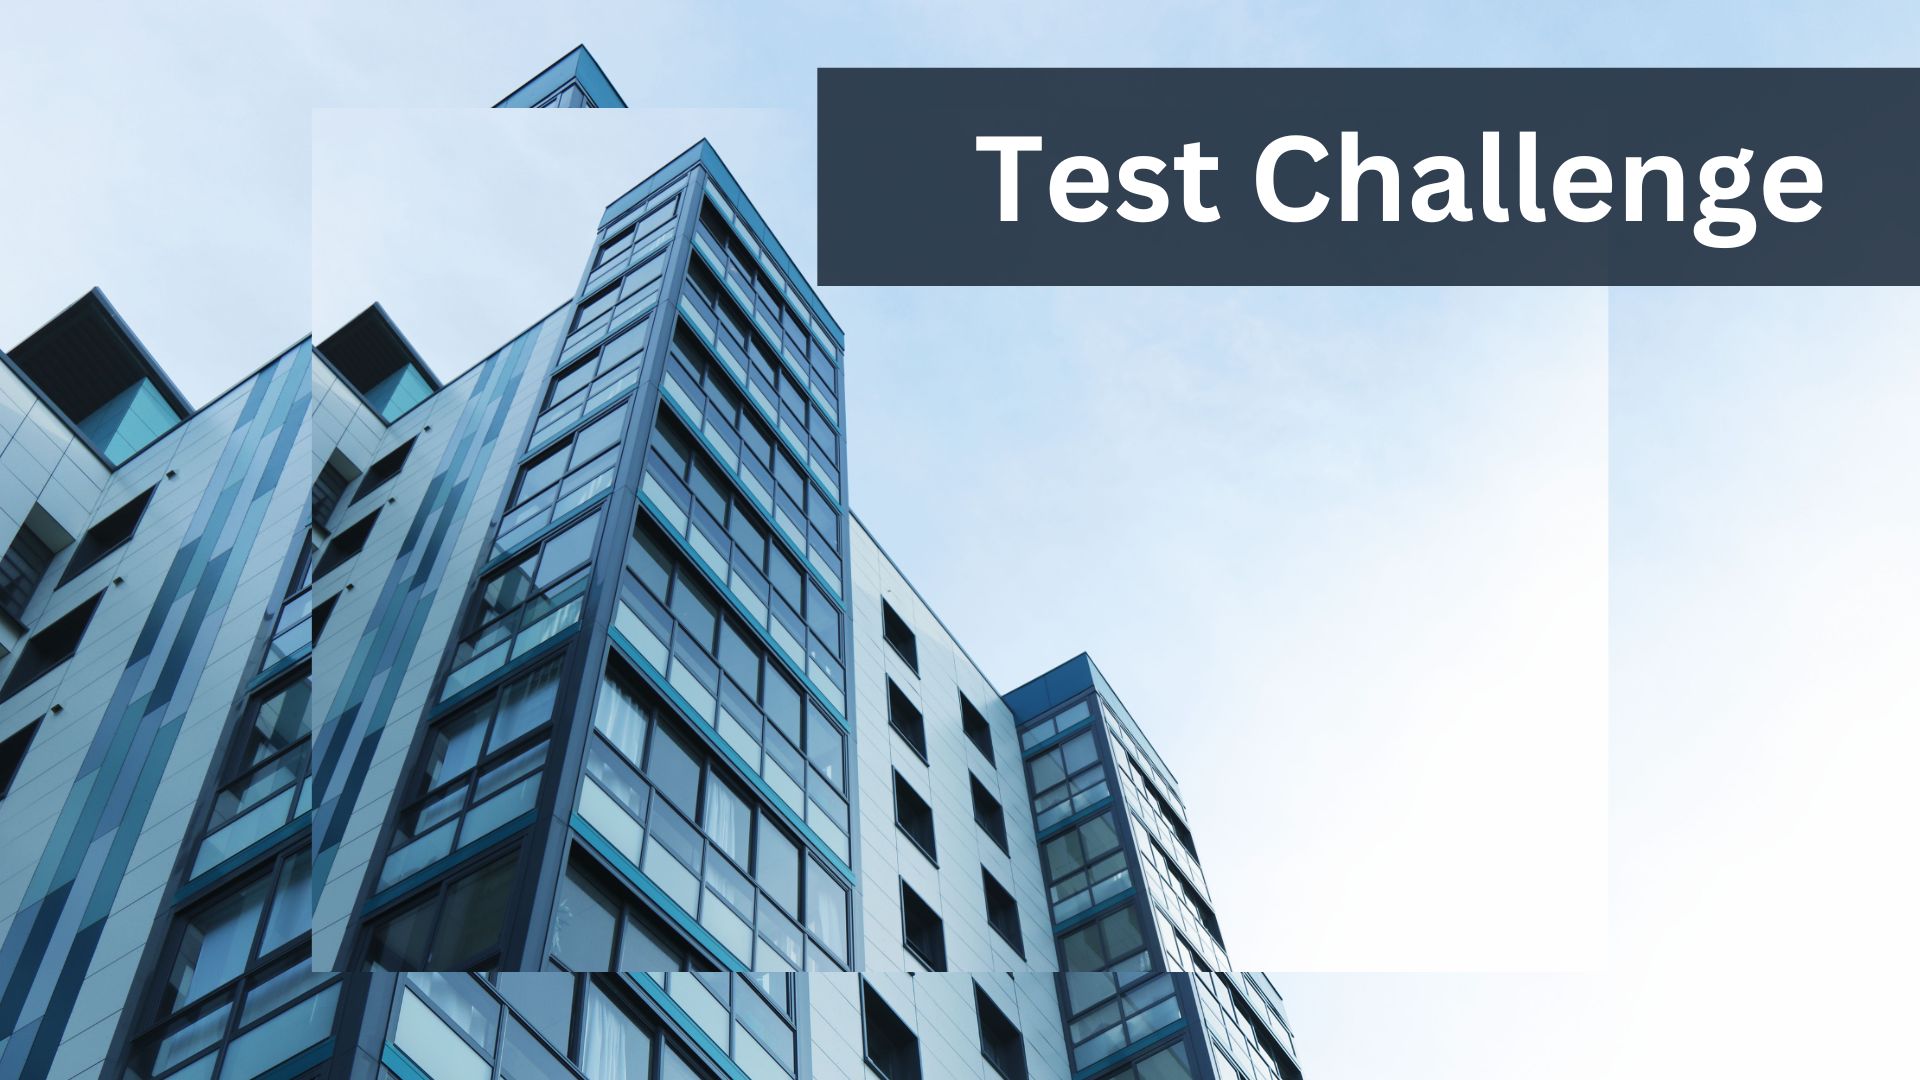 This Is An Internal Test Challenge - Do Not Apply To It